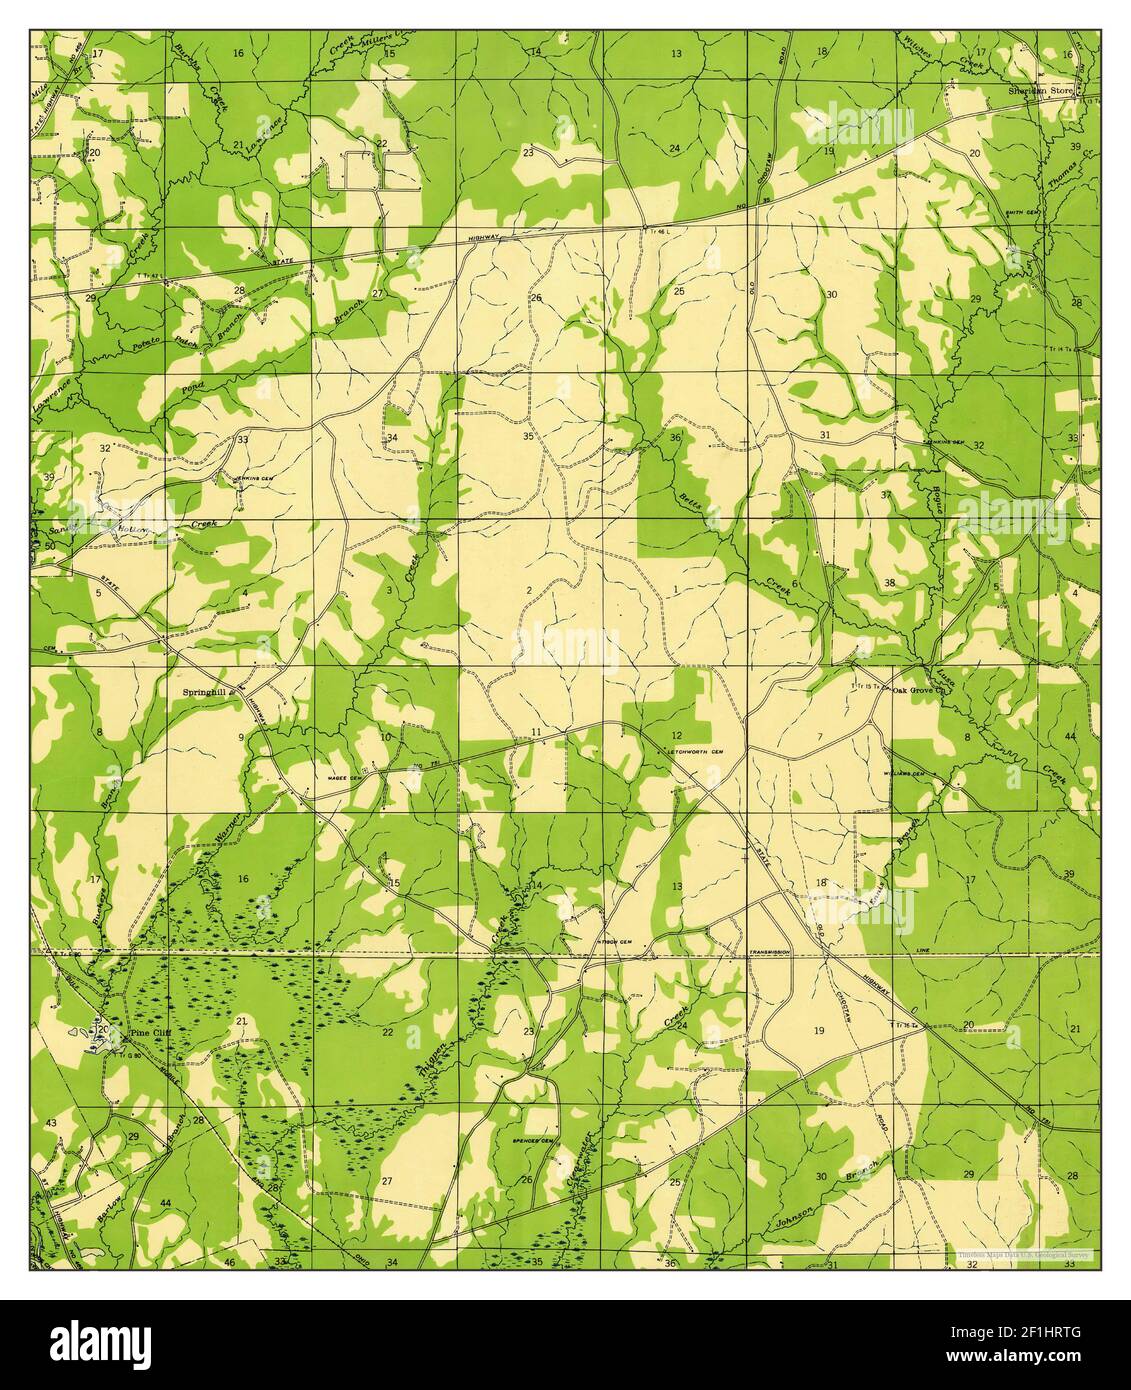 Thigpen, Louisiana, map 1942, 1:31680, United States of America by Timeless Maps, data U.S. Geological Survey Stock Photo